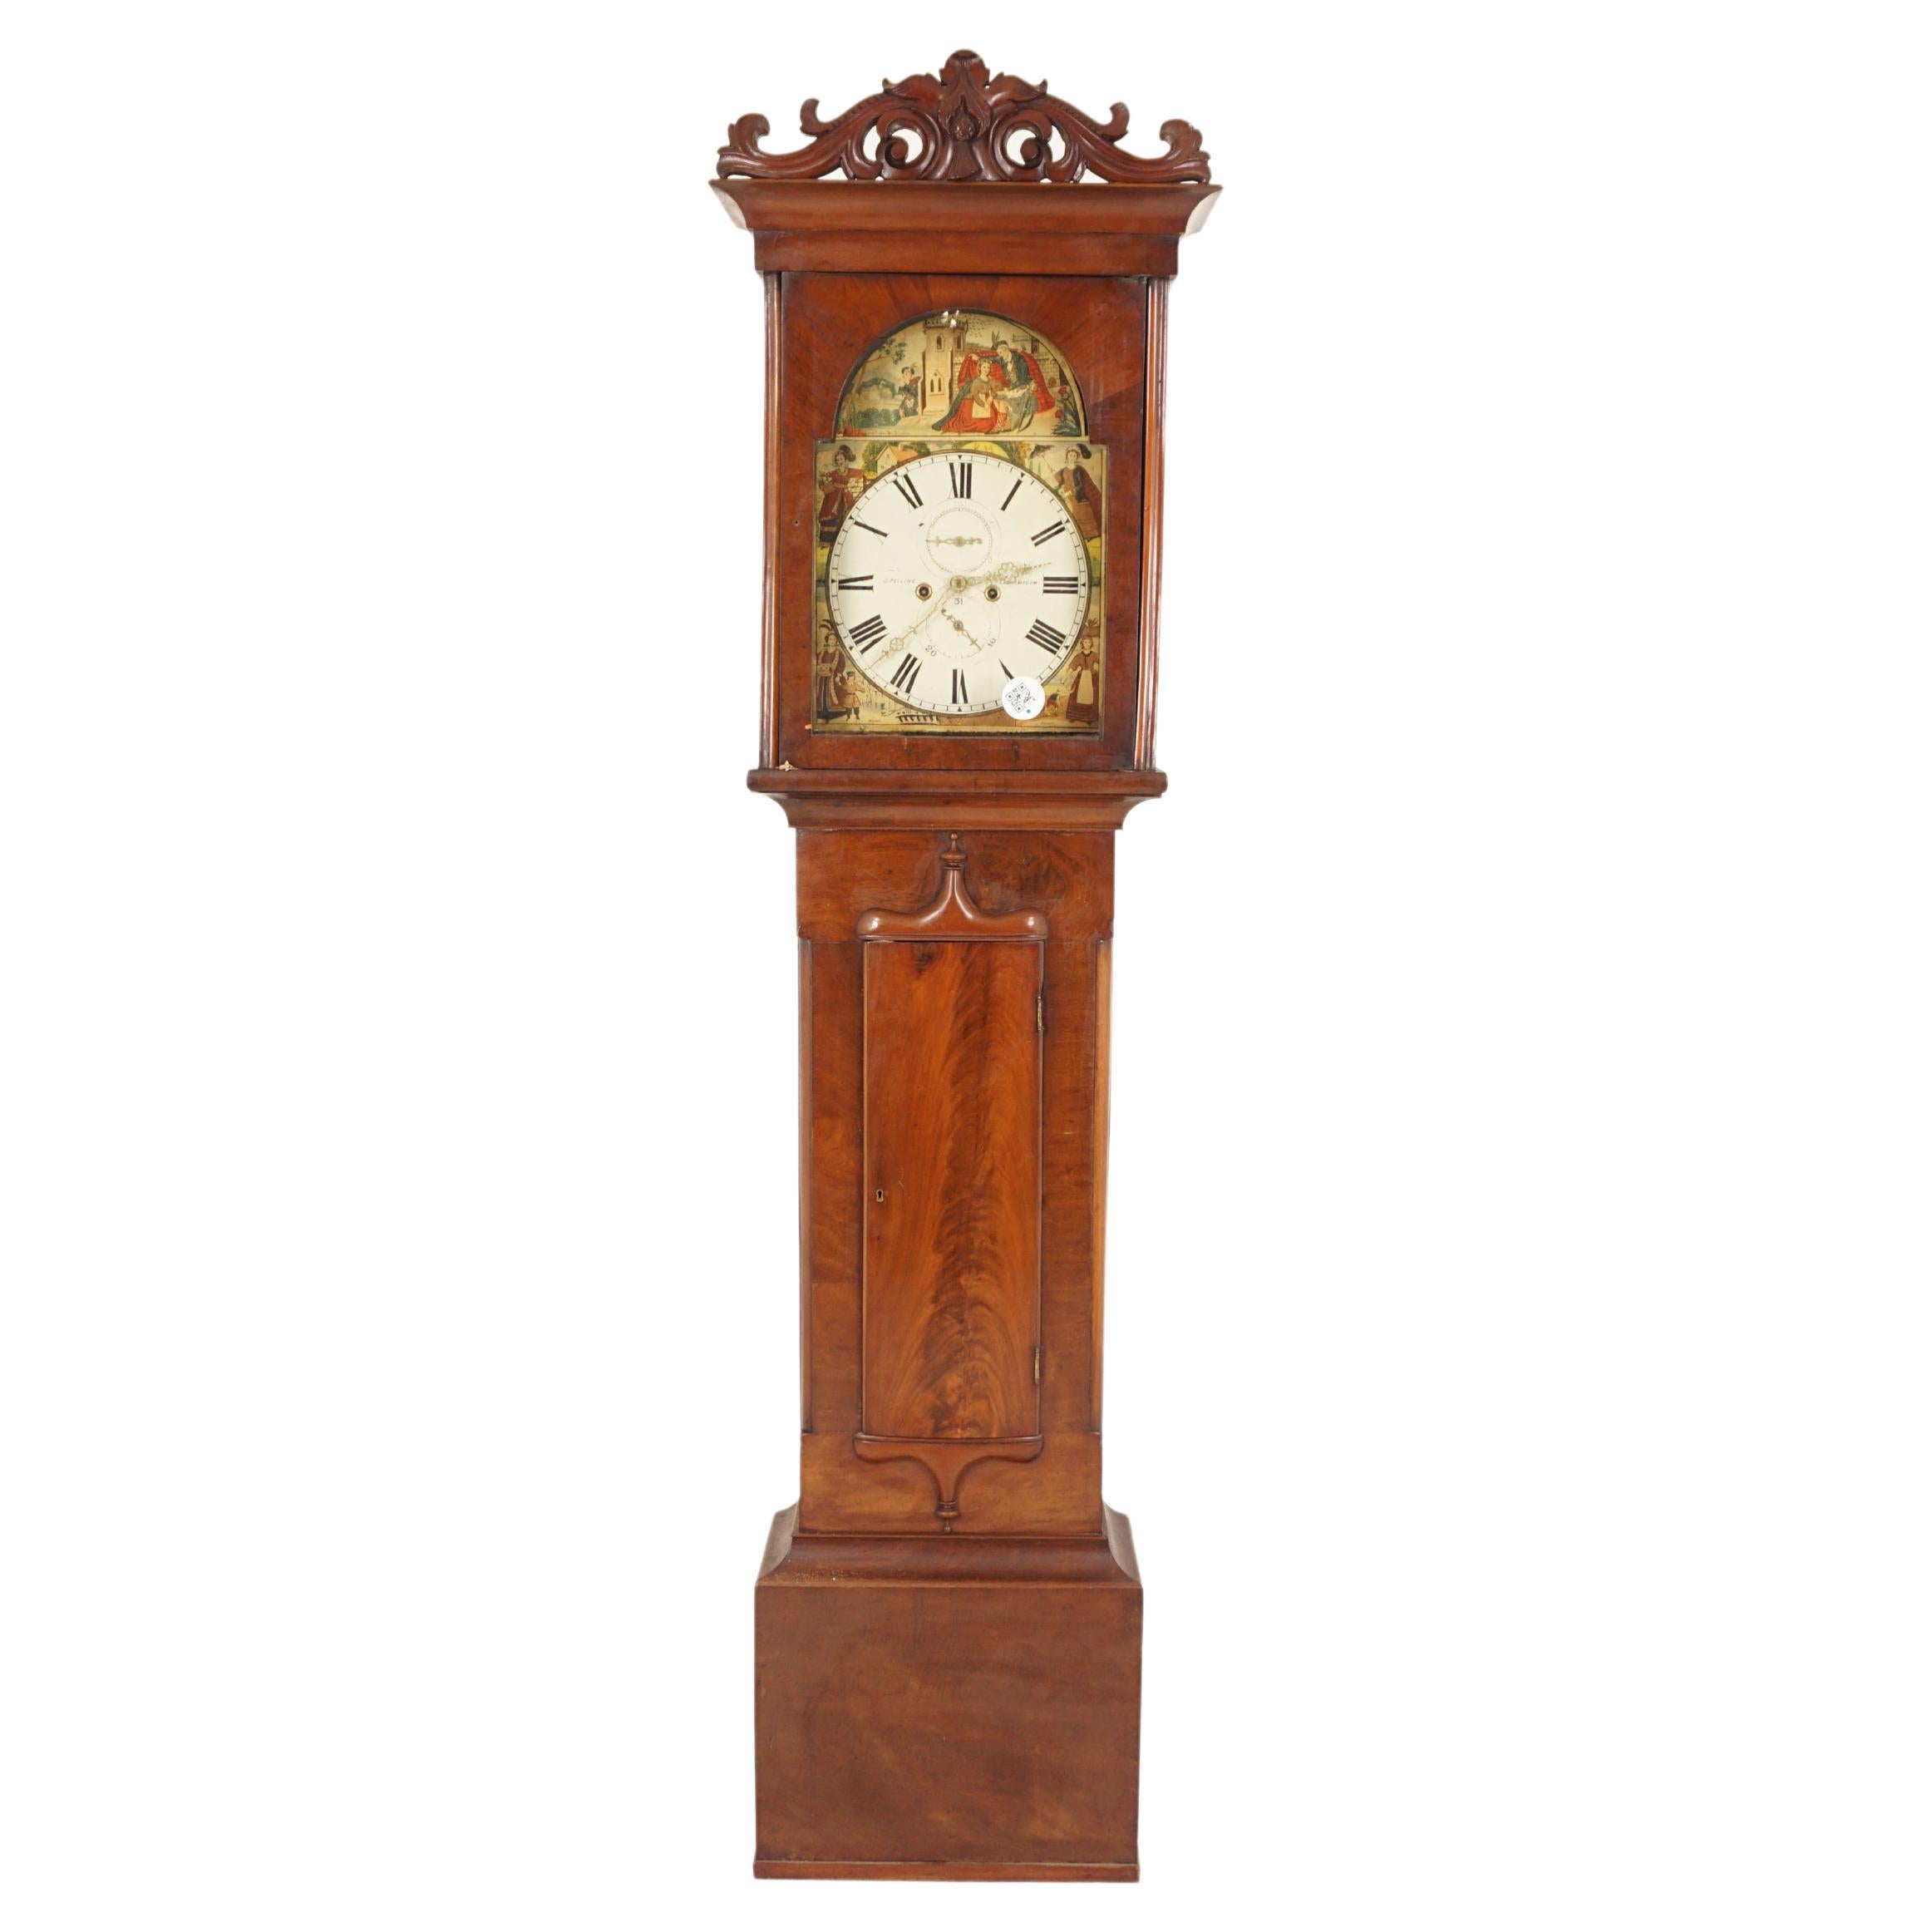 Vic. Grandfather Long Case Clock by Jas Huston of Johnstone, Scotland 1870 H182